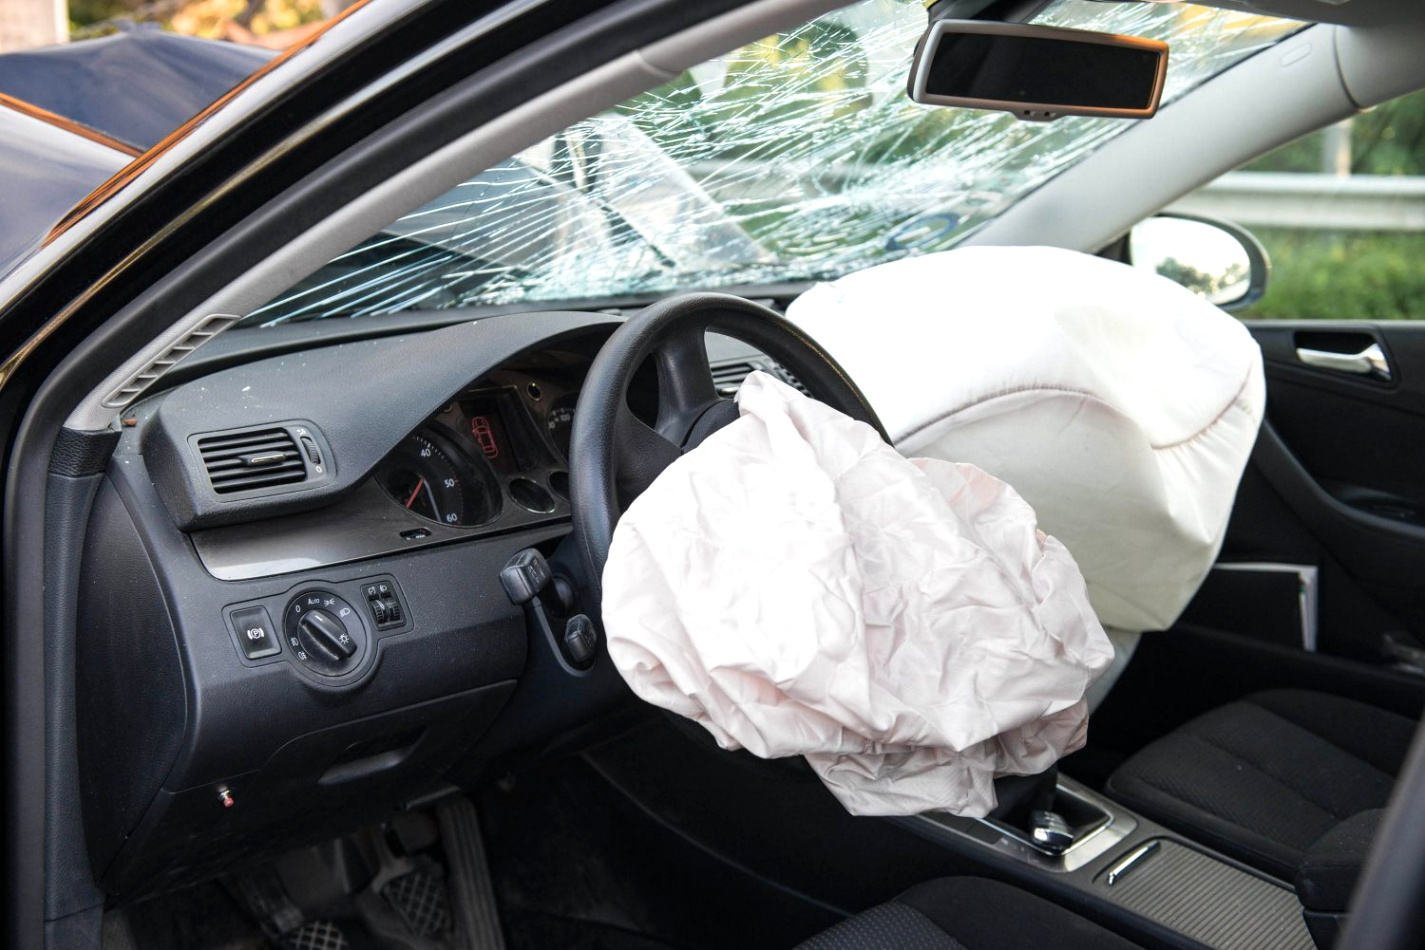 Auto Accident Defense Lawyer Dans Exploding Takata Airbags and Unsafe Airbag Installation In Cars